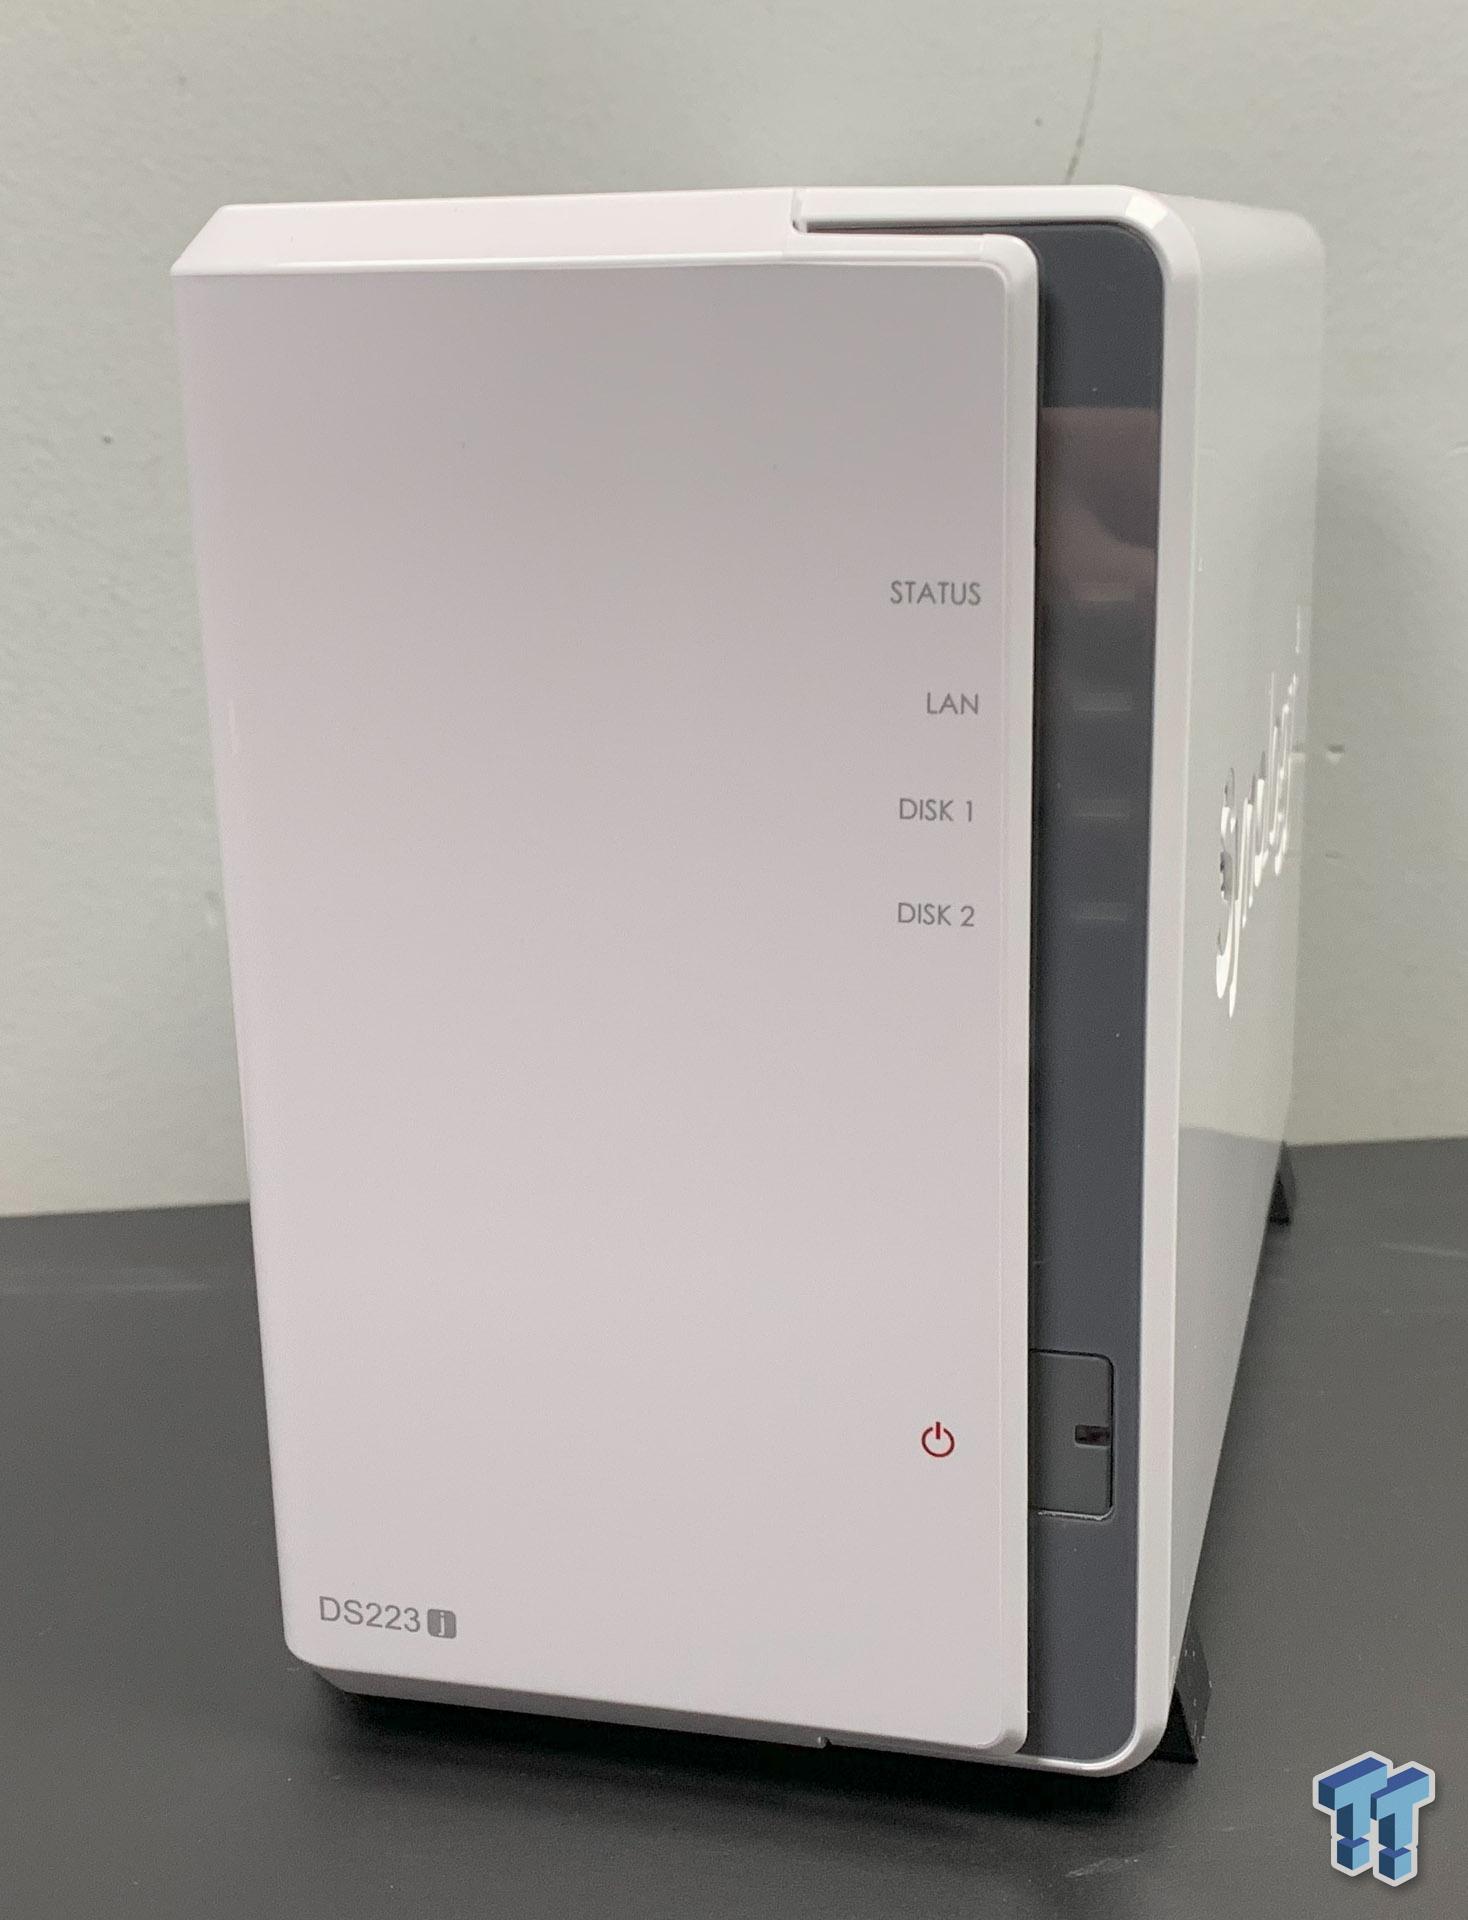 Synology DS120j Review: NAS for Every Home